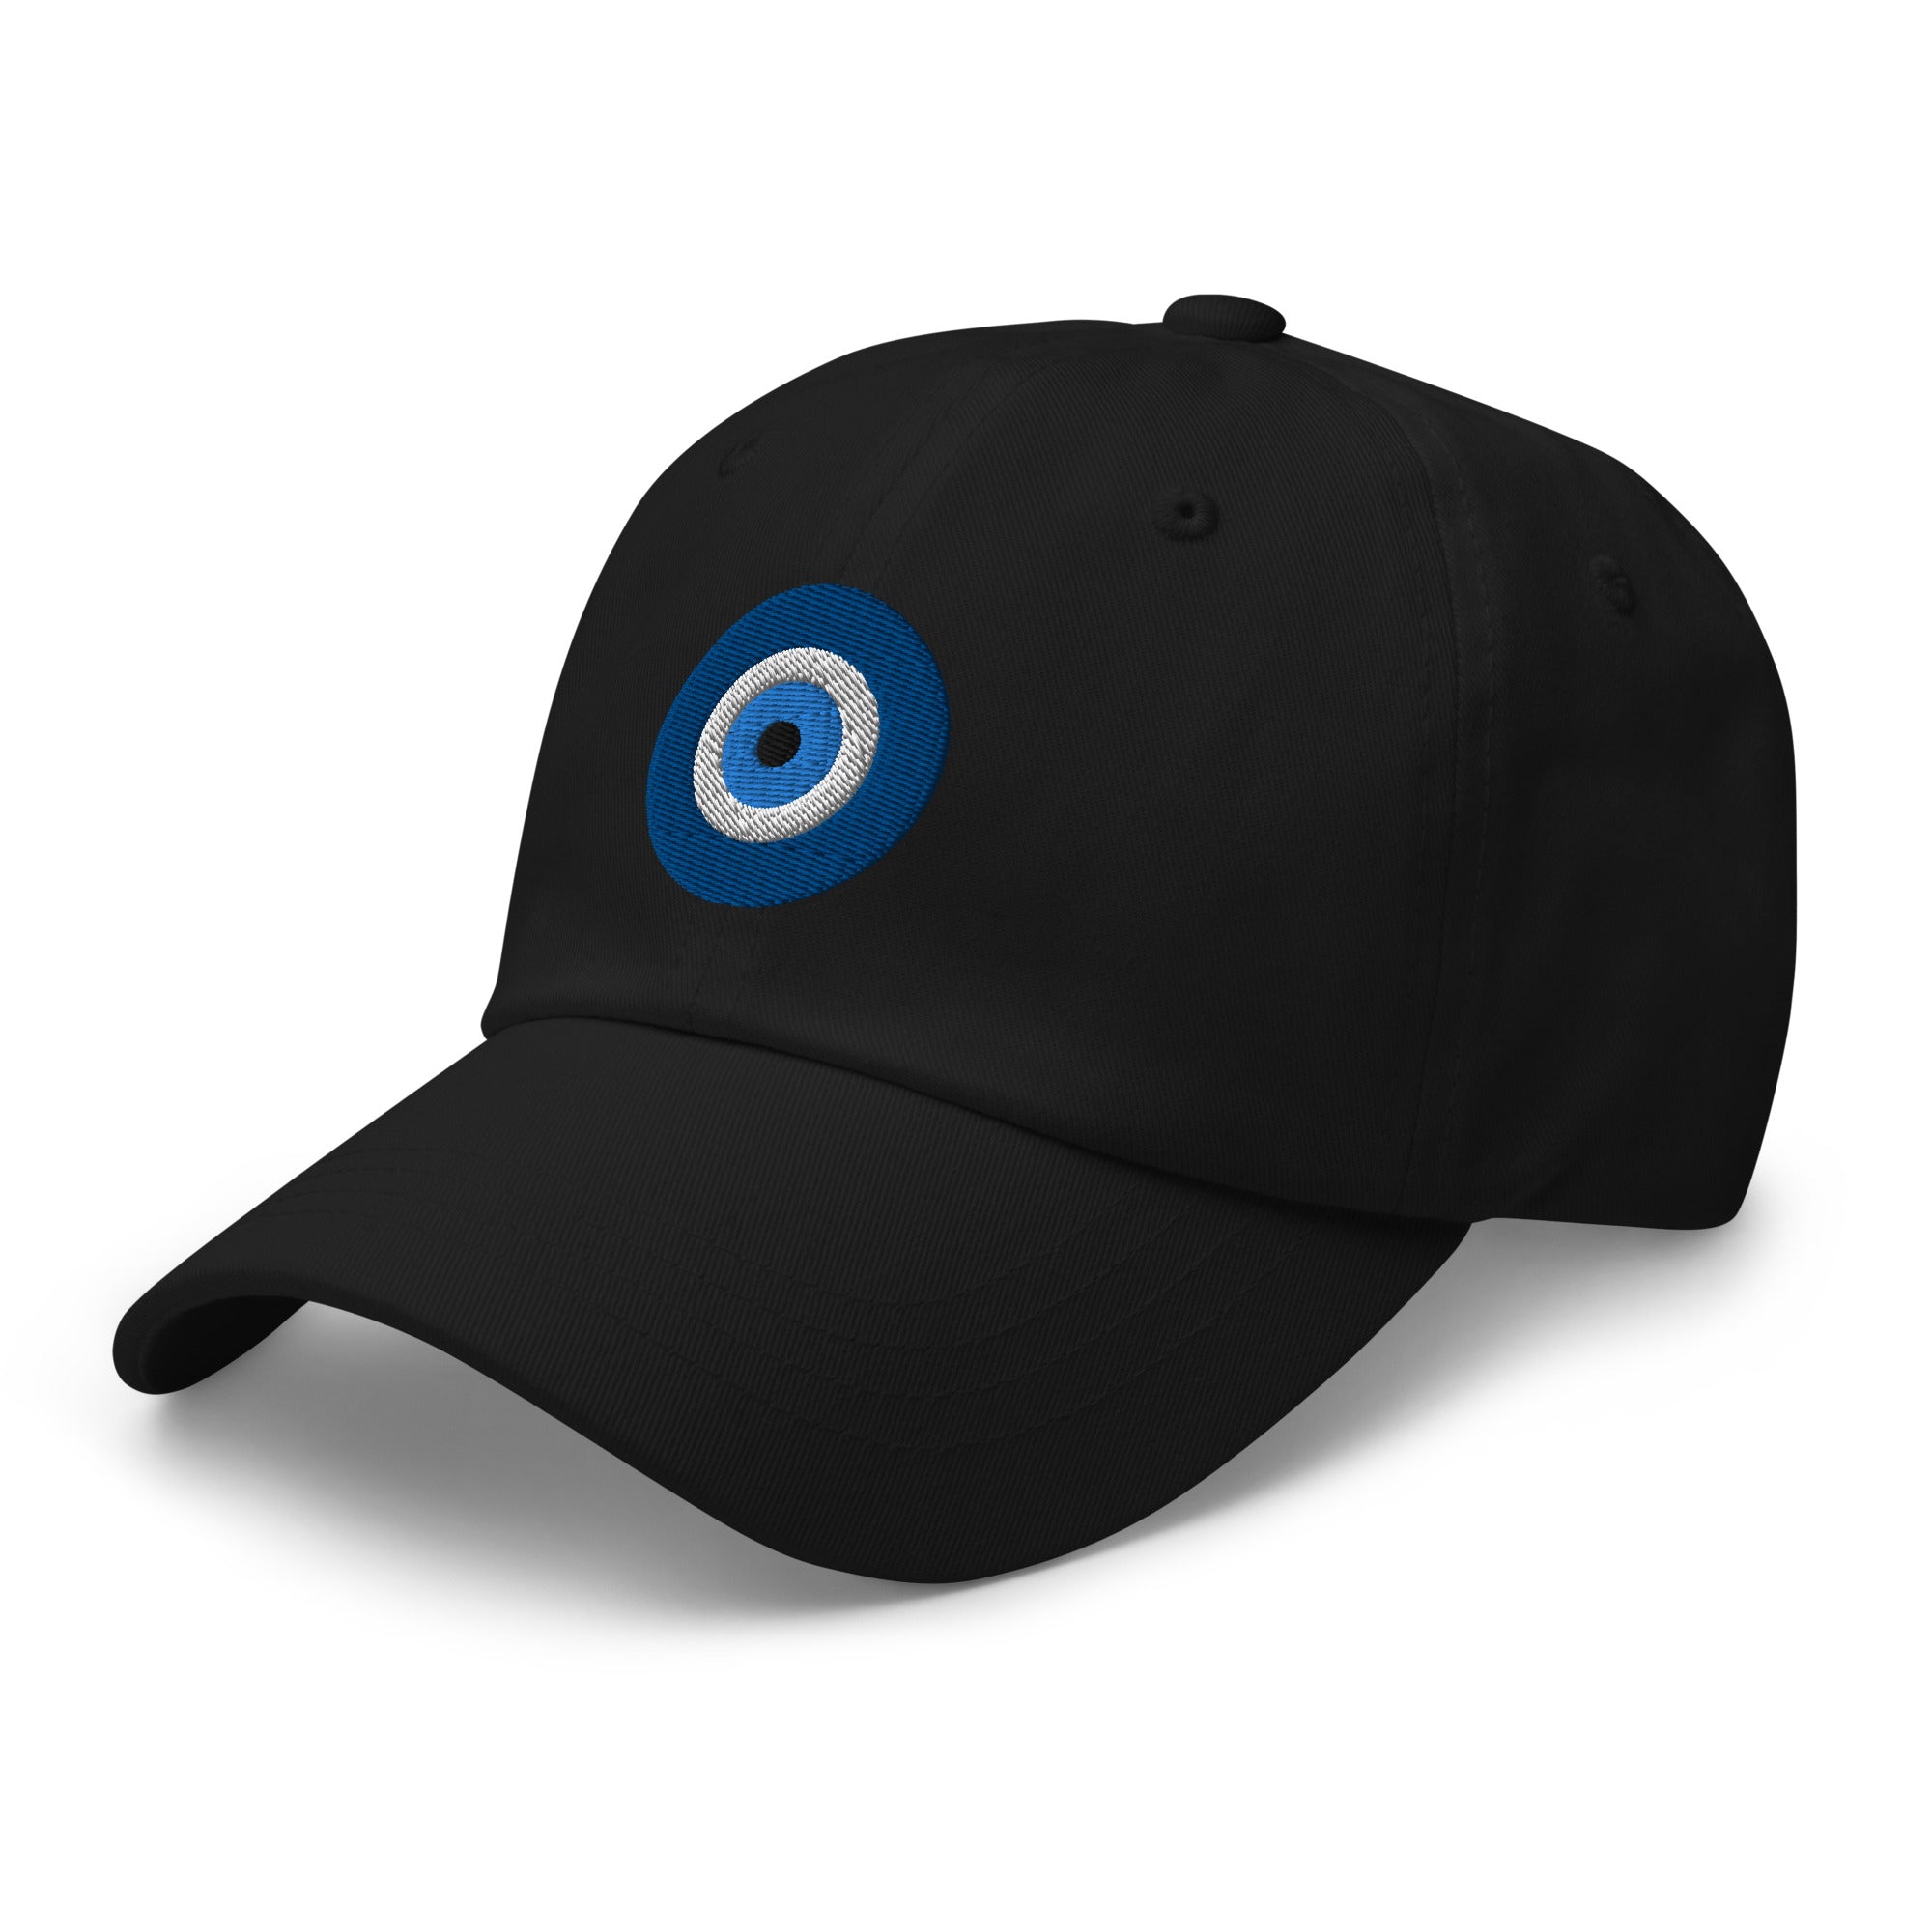 The Evil Eye Embroidered Baseball Cap Supernatural Look or Stare Dad hat - Edge of Life Designs